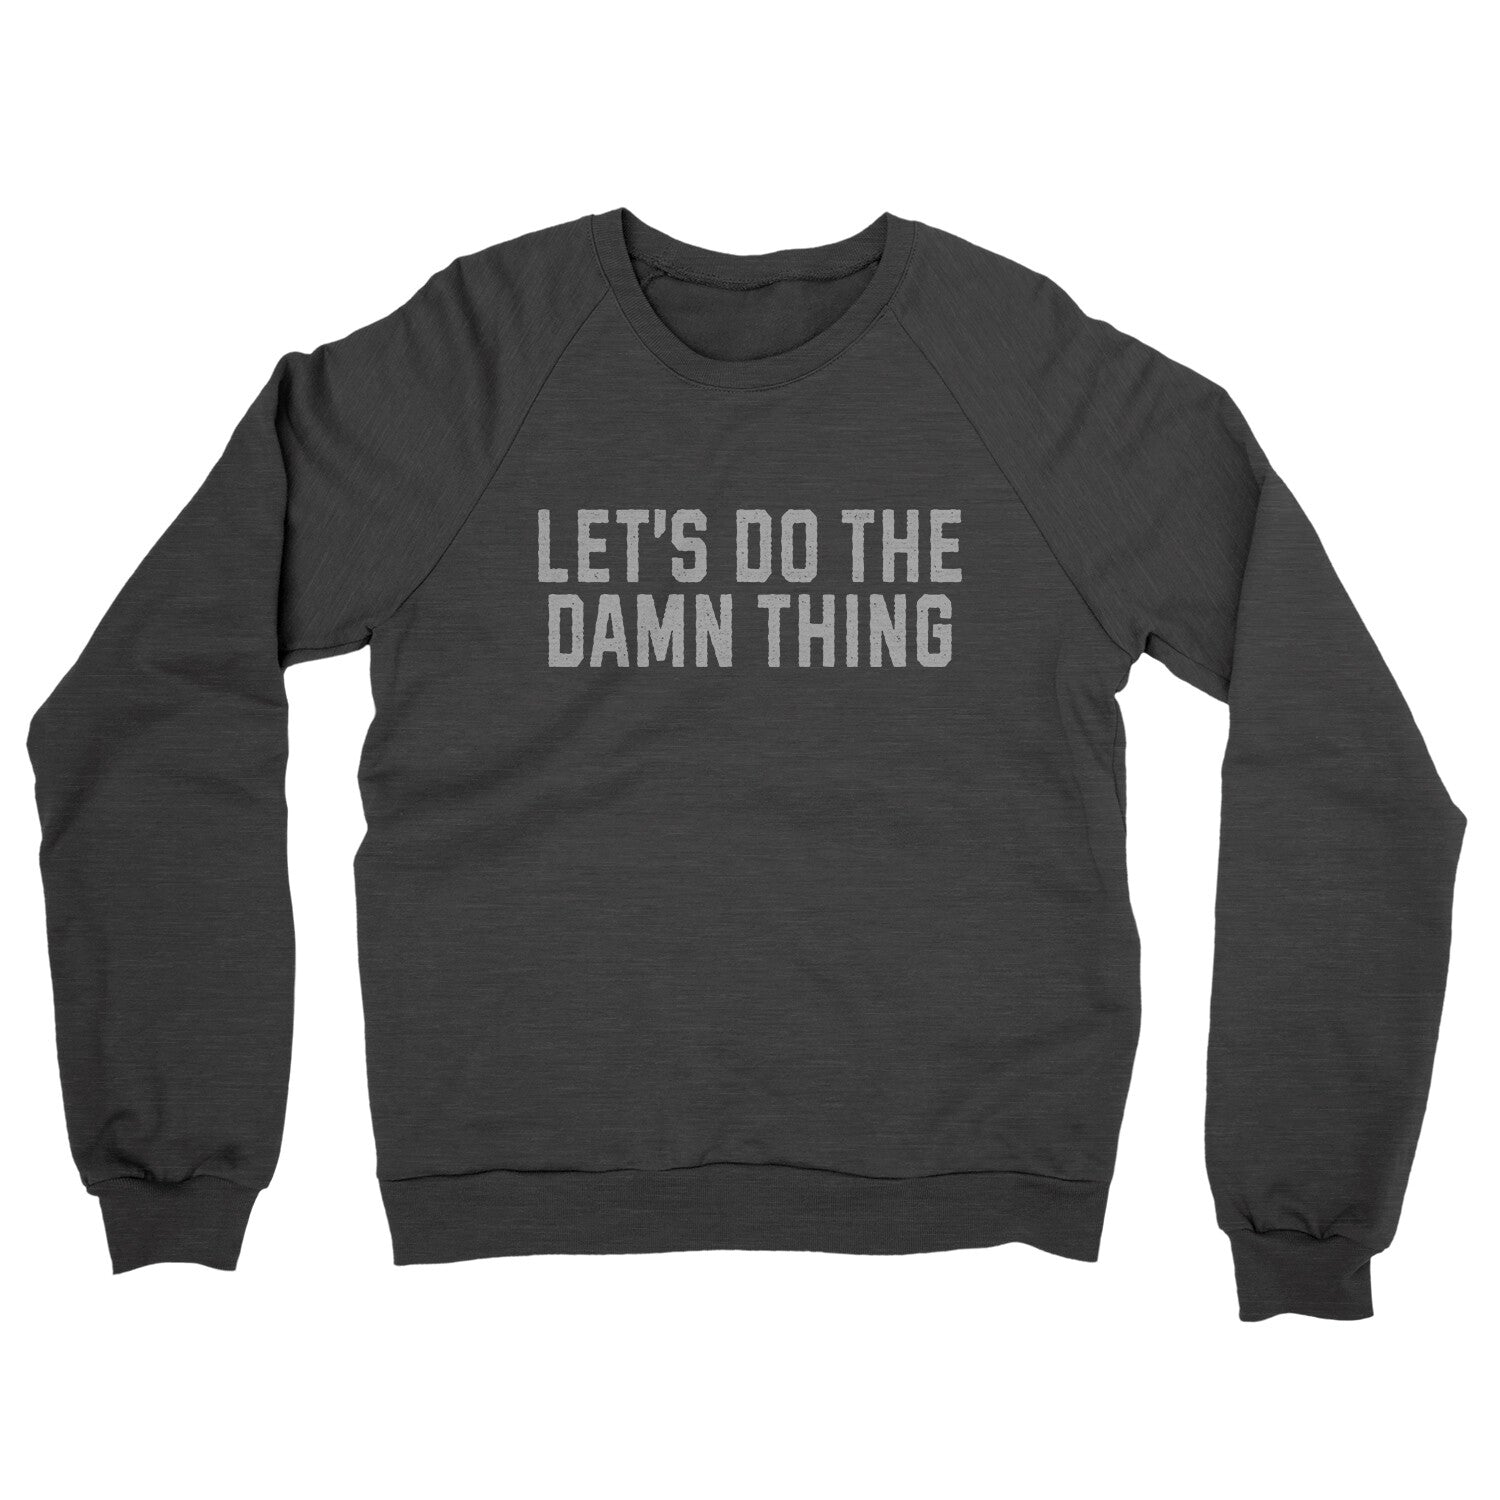 Let’s Do the Damn Thing in Charcoal Heather Color